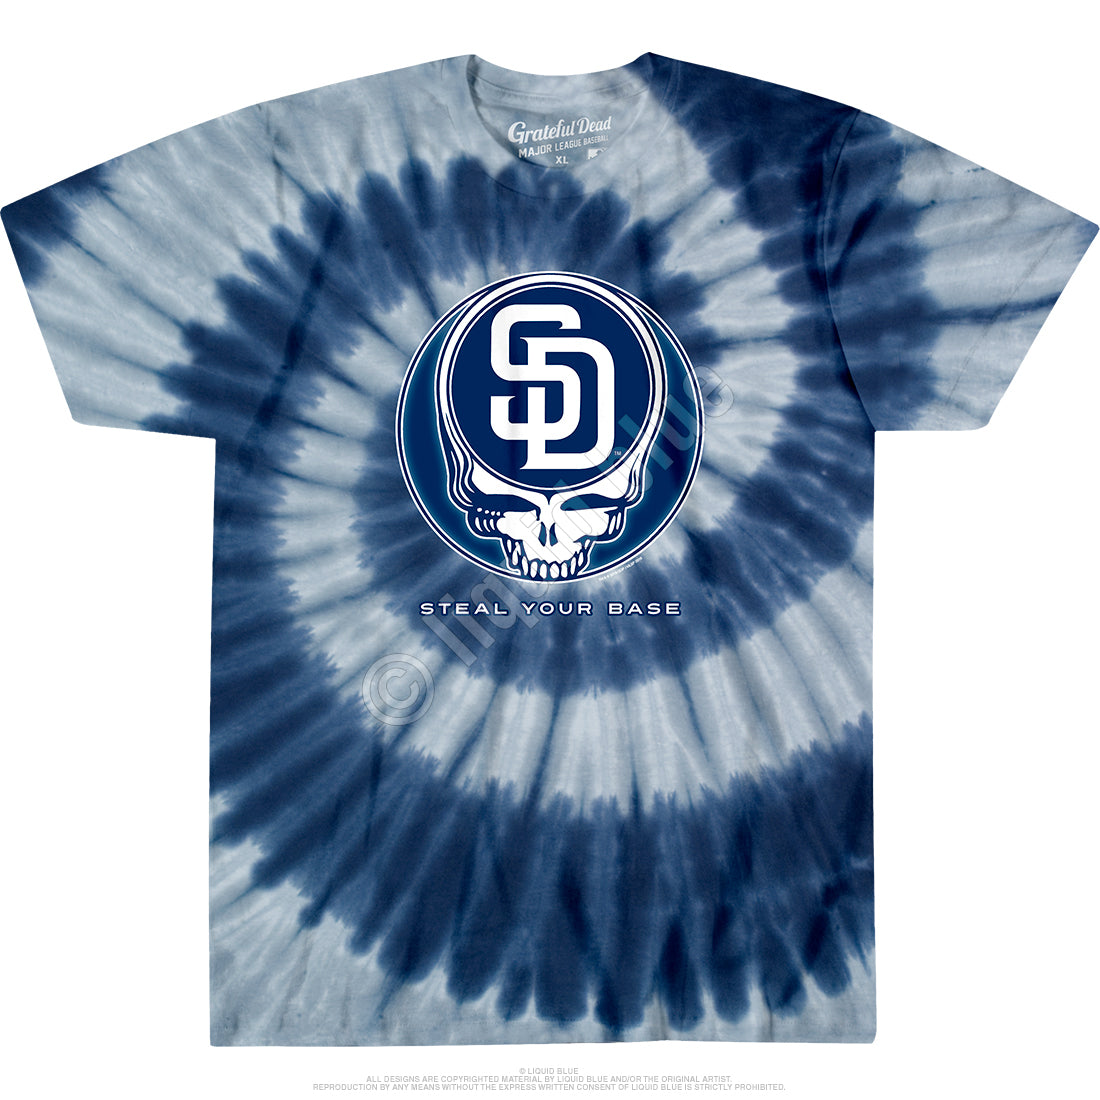 White Sox Tie Dye Steal Your Base